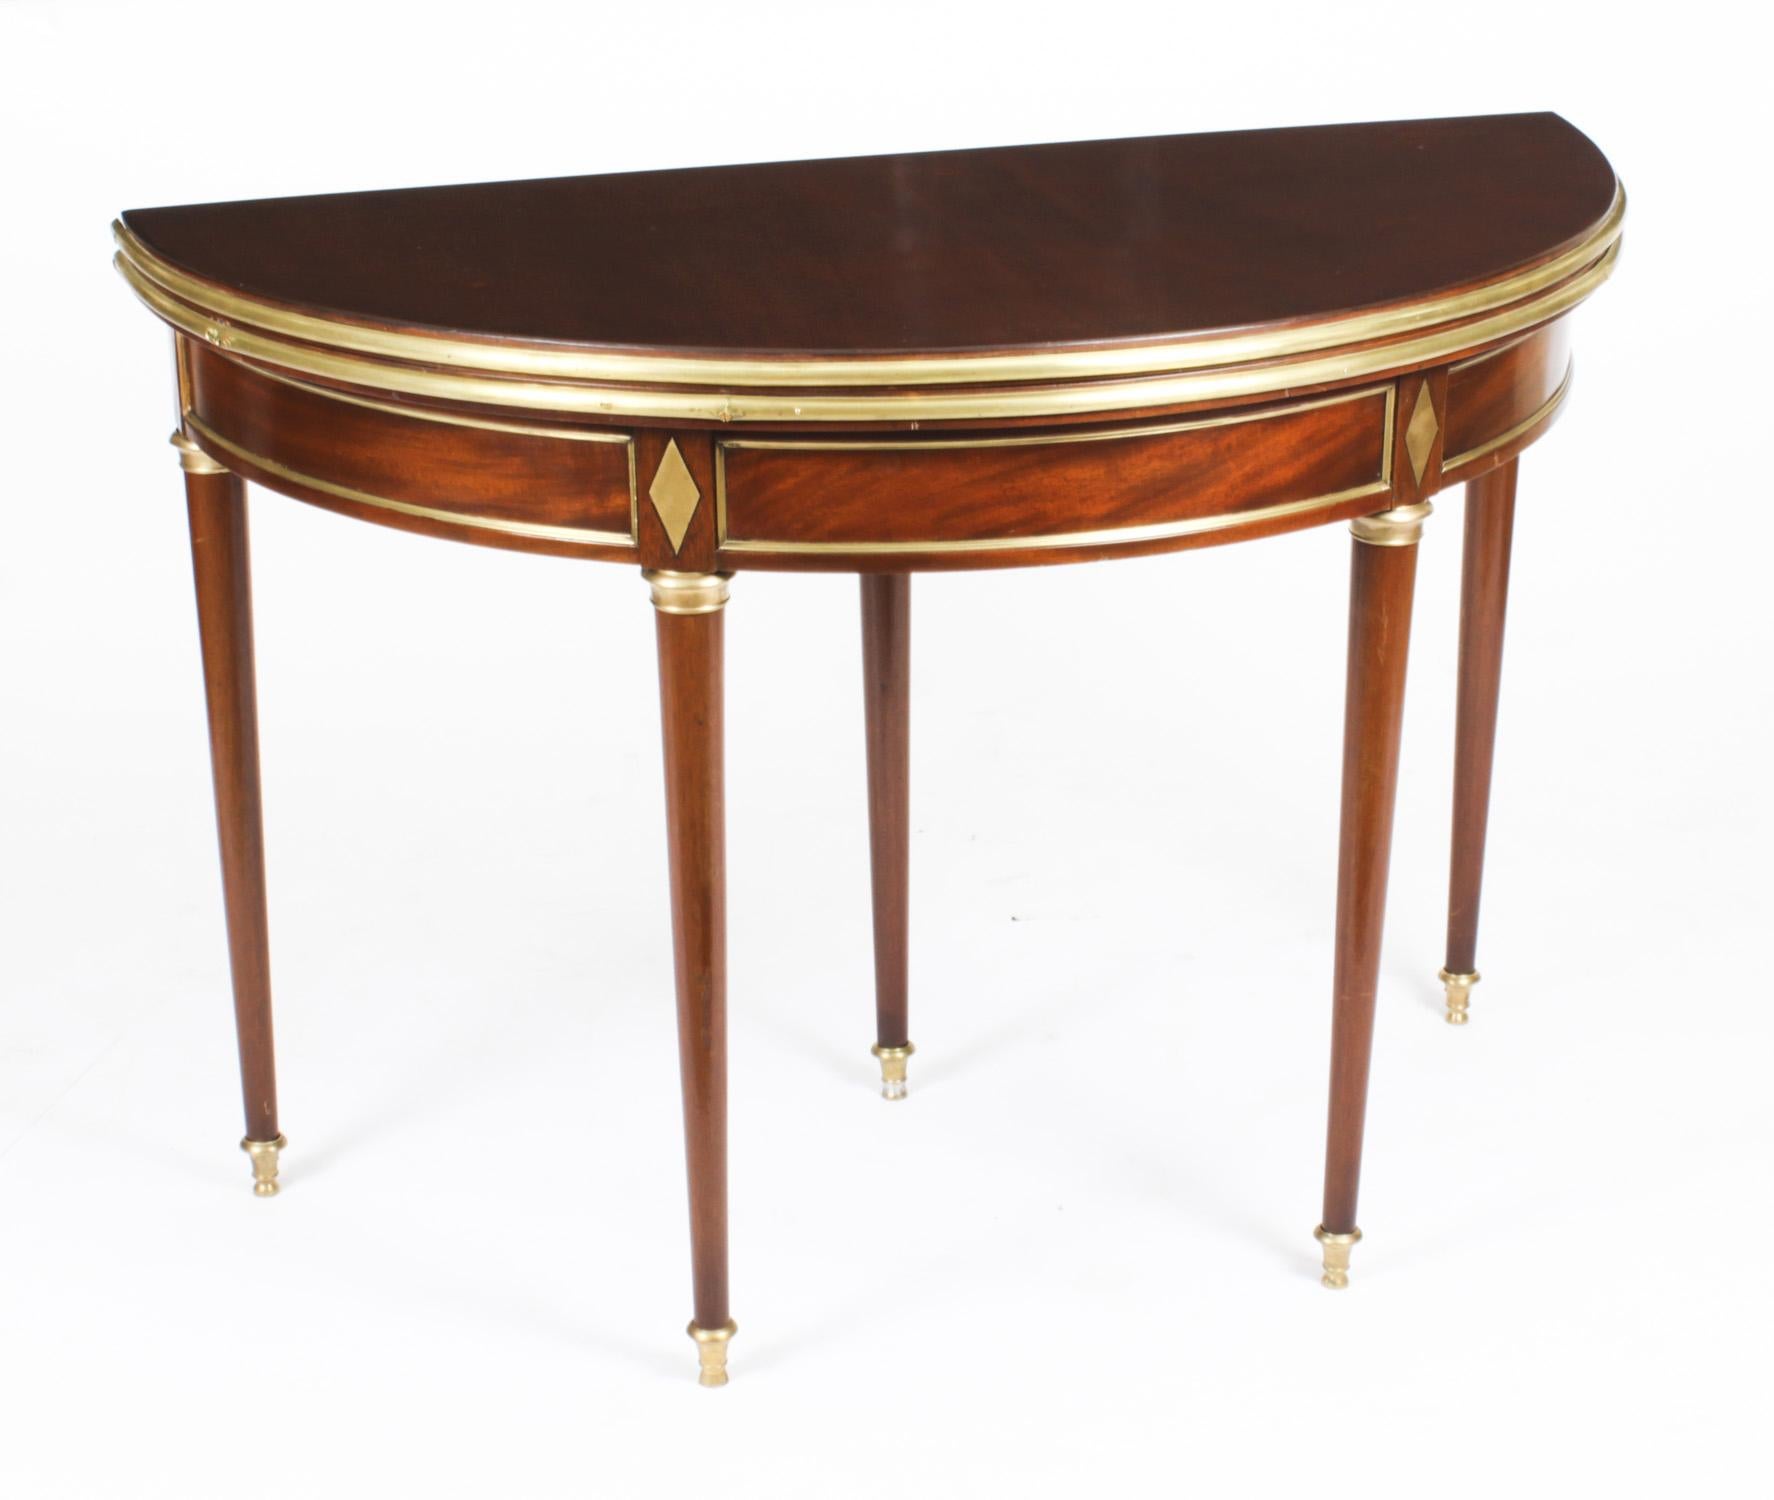 Antique French Directoire Brass Mounted Card Table Early 19th Century For Sale 13